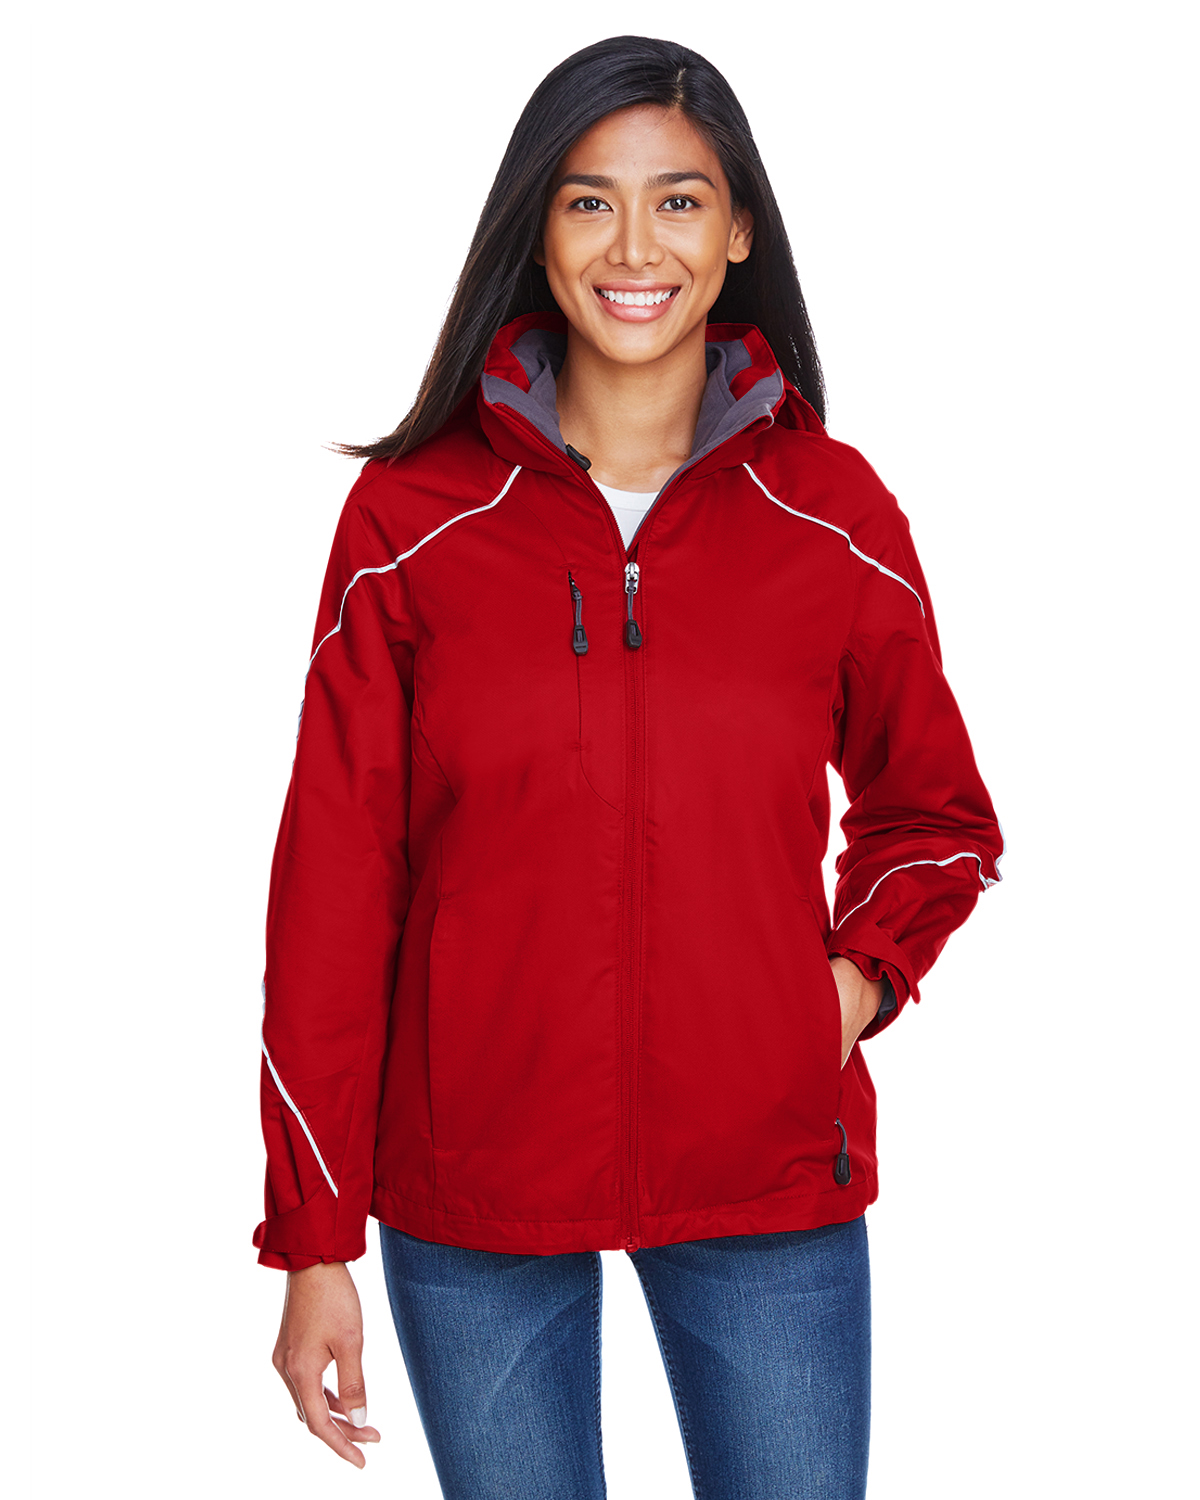 Ladies' Angle 3-in-1 Jacket with Bonded Fleece Liner - CLASSIC RED - S - image 1 of 3